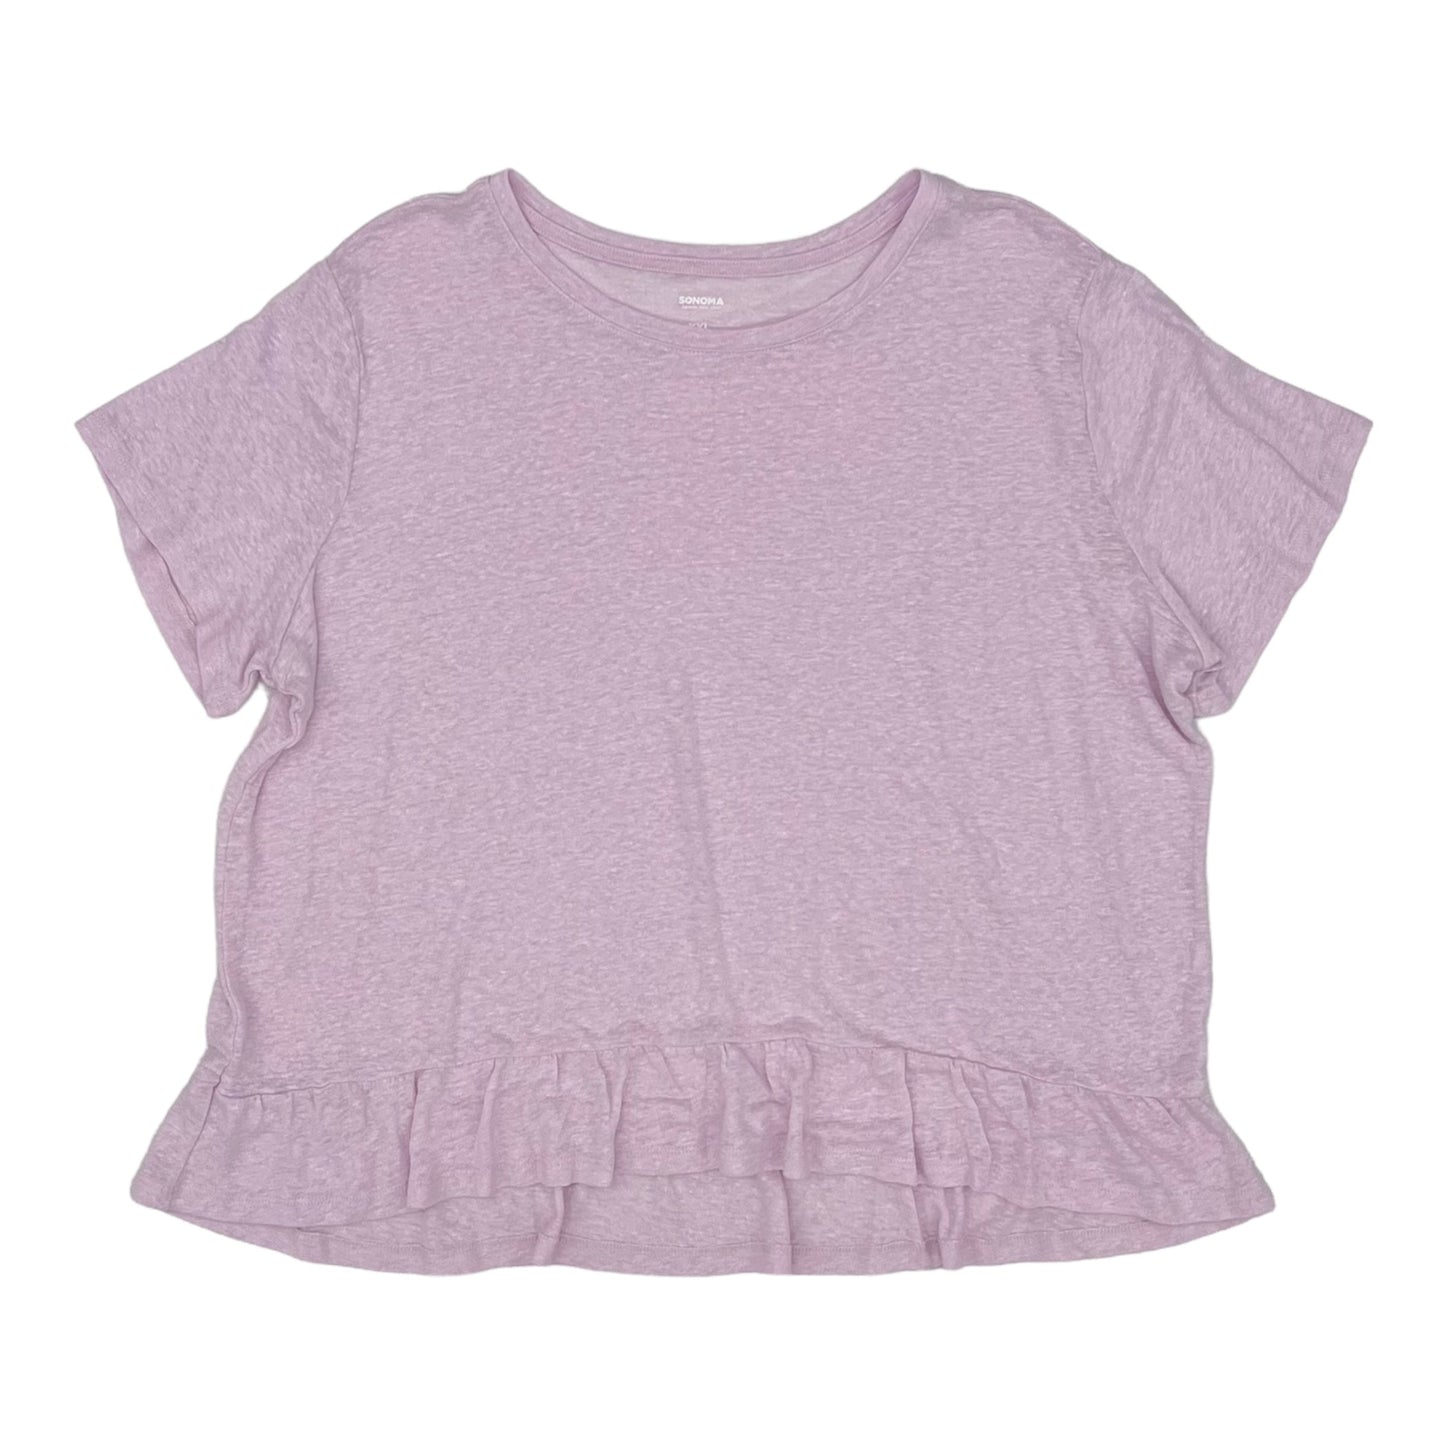 PINK SONOMA TOP SS, Size 2X